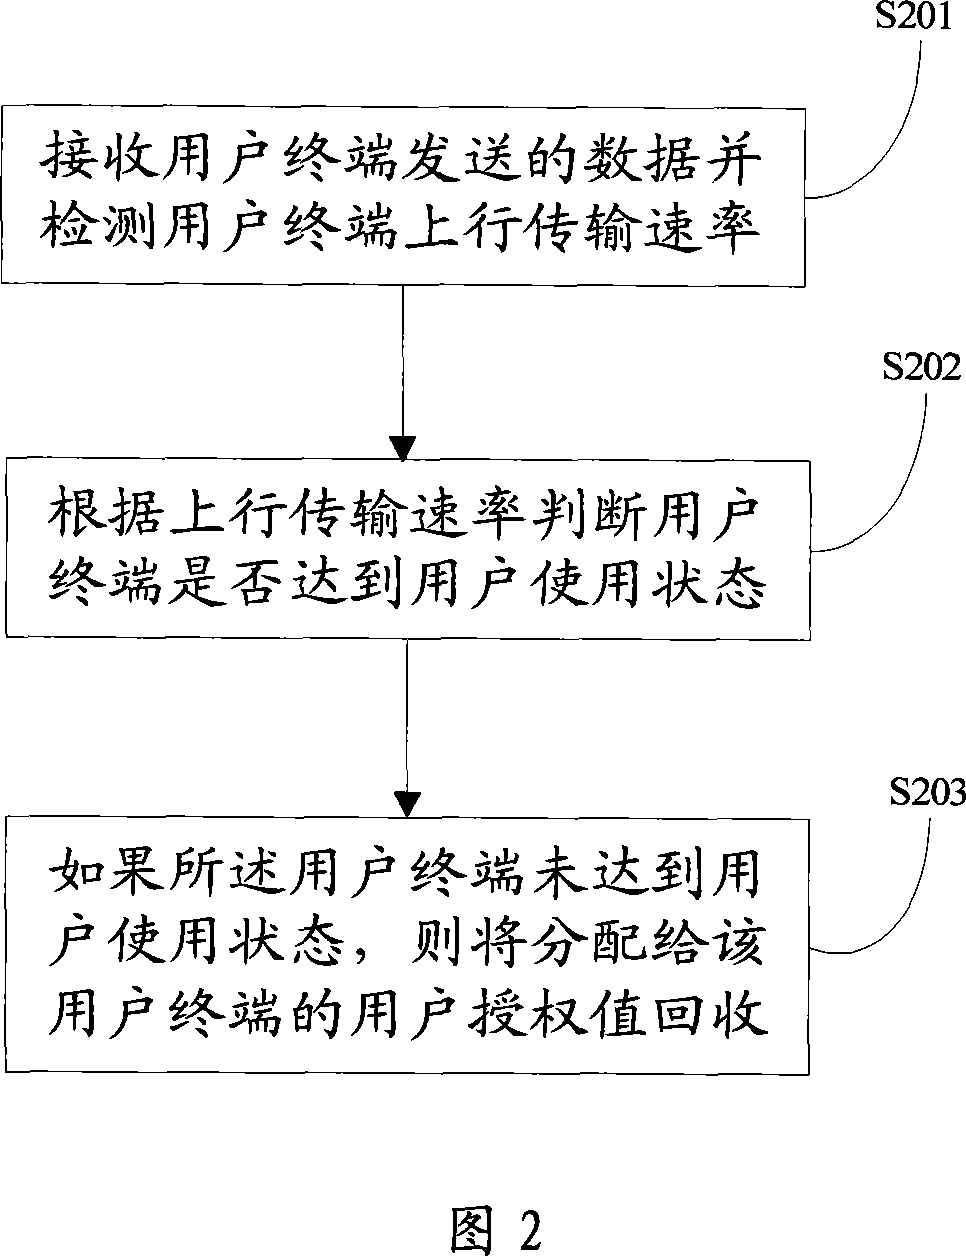 Customer authorization value control method and device